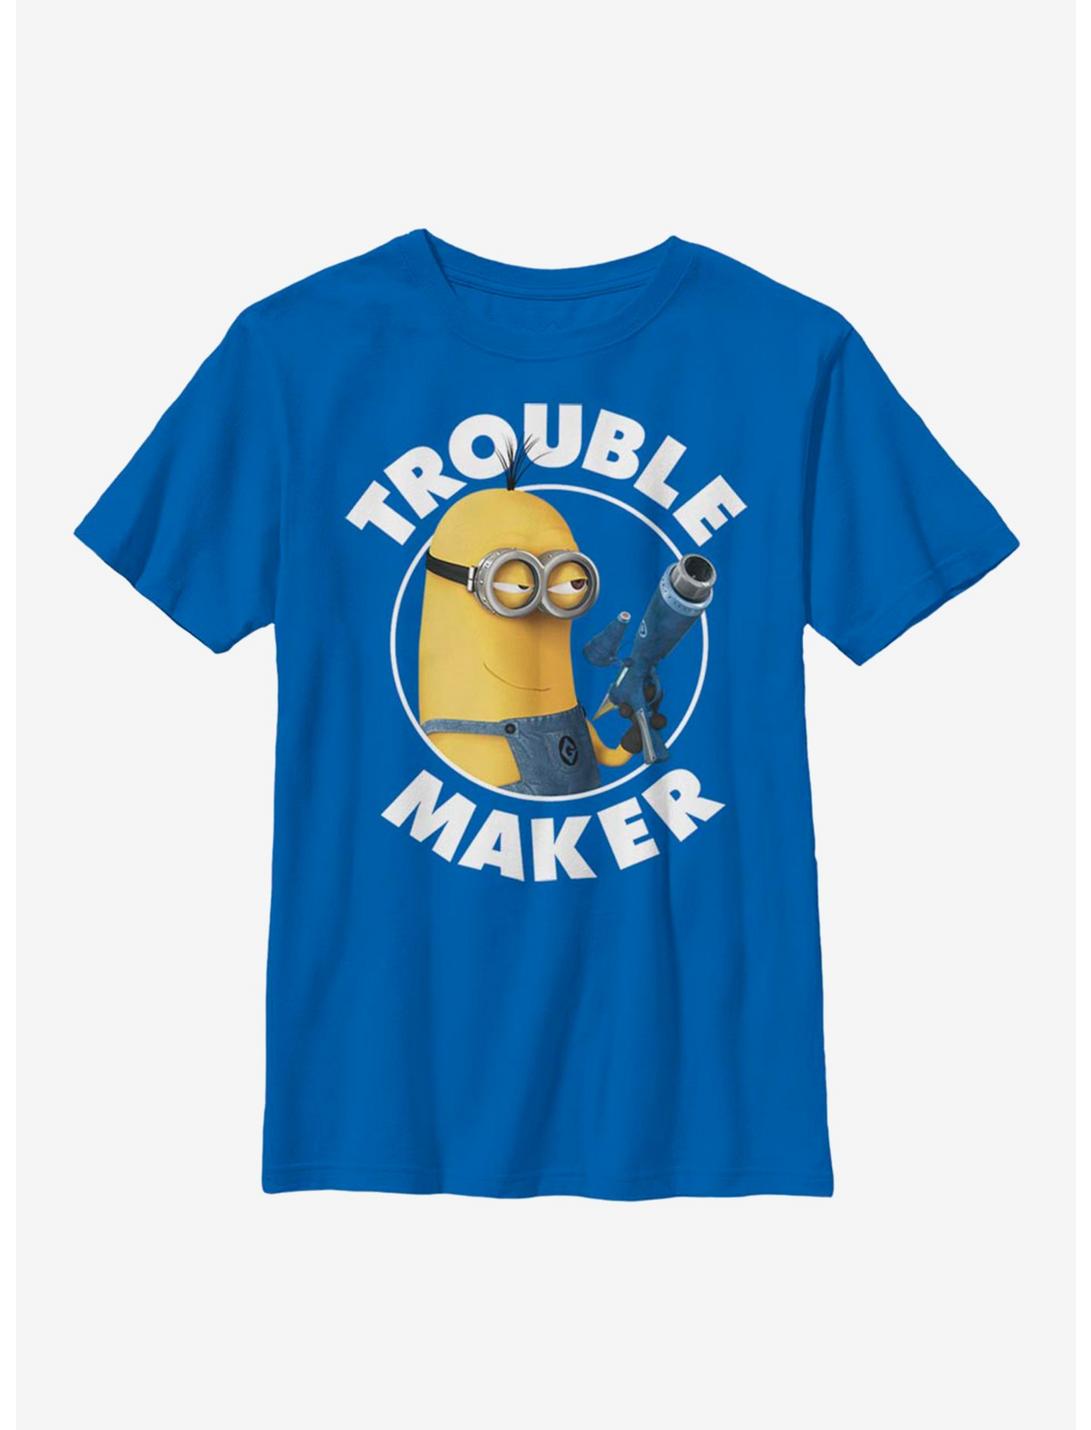 Despicable Me Minions Trouble Maker Youth T-Shirt, ROYAL, hi-res